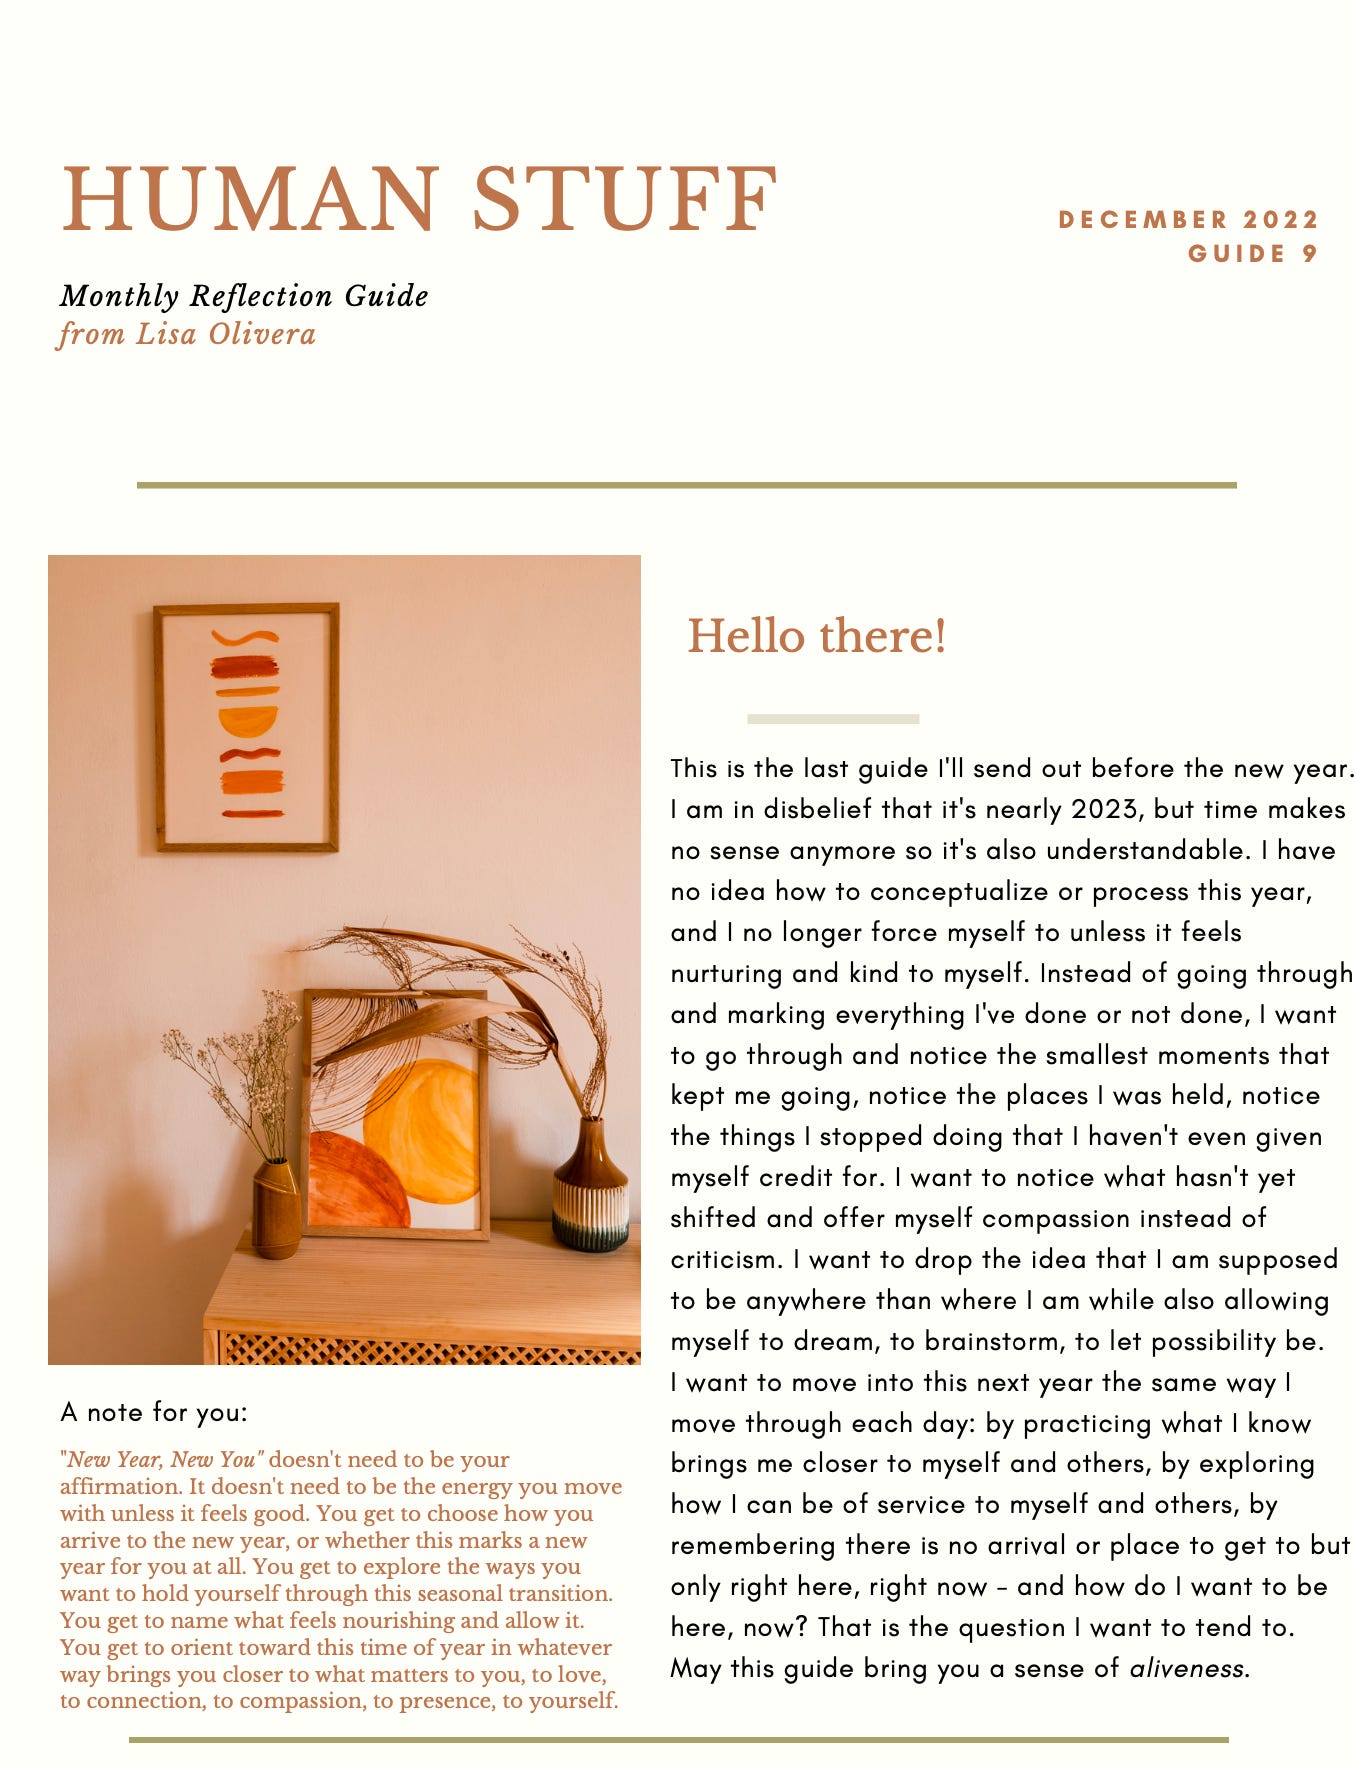 Image of the first page of a newsletter titled Human Stuff Monthly Reflection Guide. Included is a photo of a warmly-lit room, a note about new years not needing to be "new year, new you" energy, and an introduction to this month's guide.